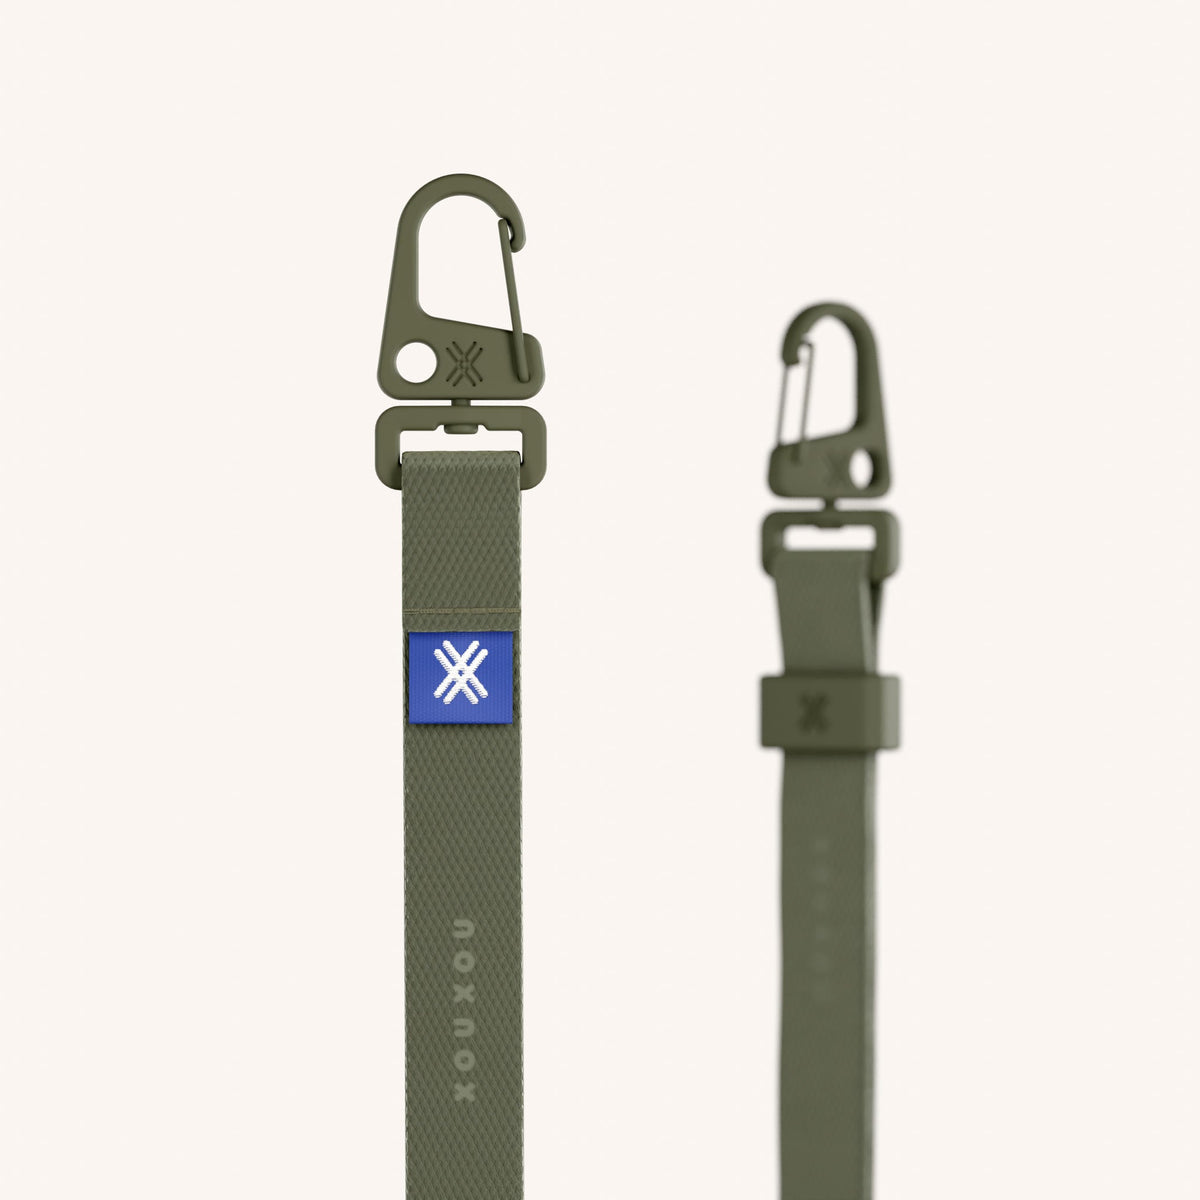 Modular Slim Lanyards for Phone Cases and Bags | XOUXOU®